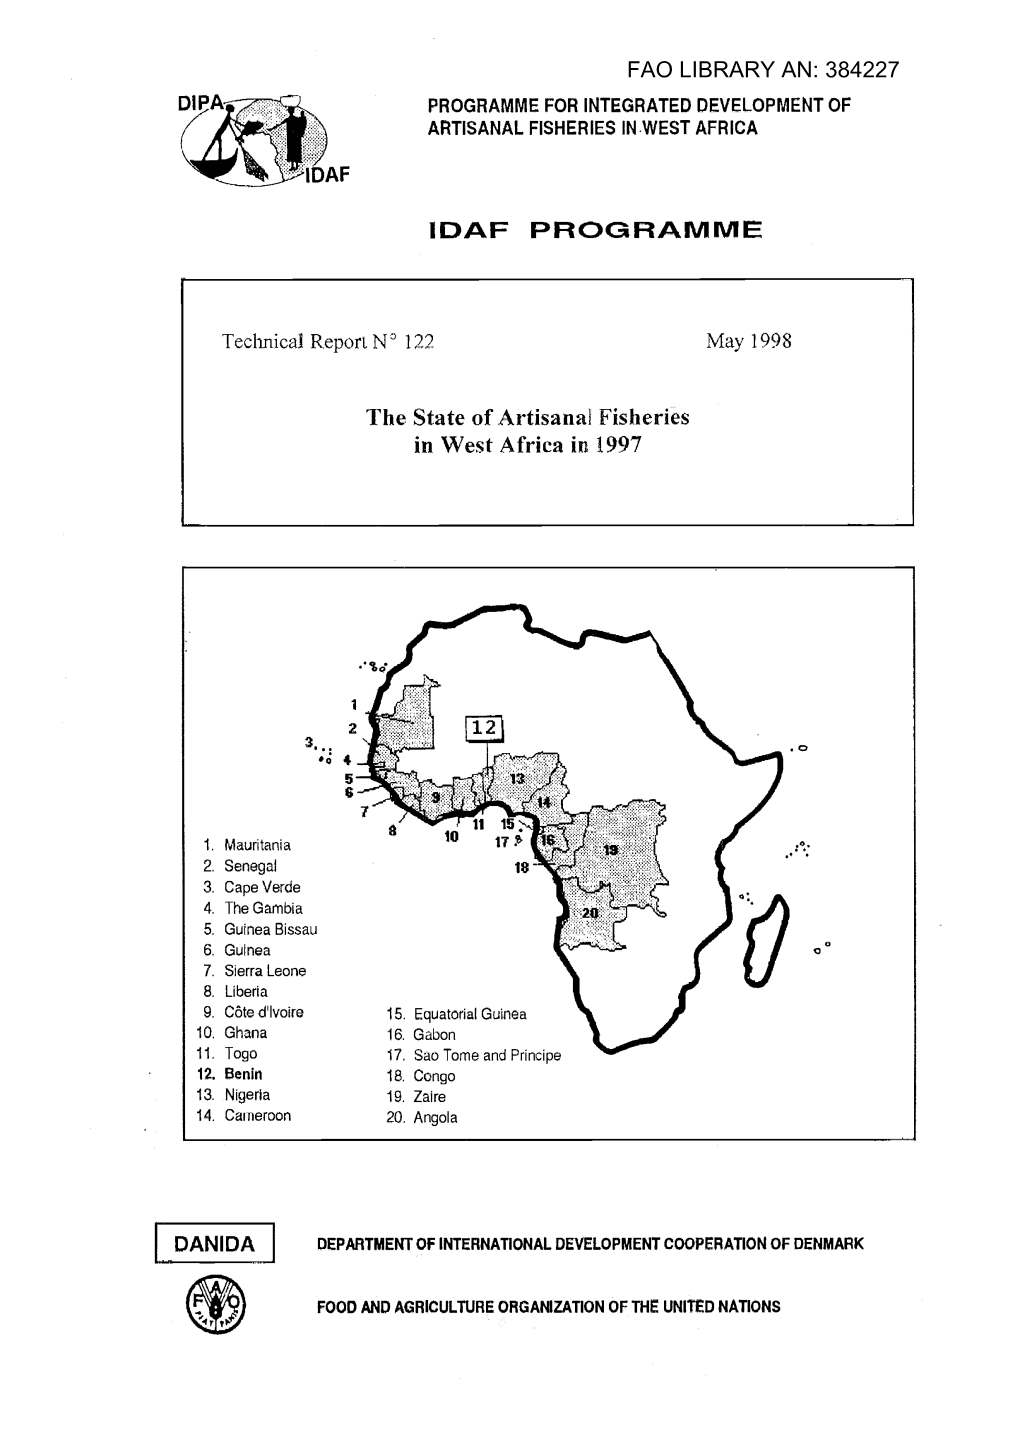 The State of Artisanal Fisheries in West Africa in 1997